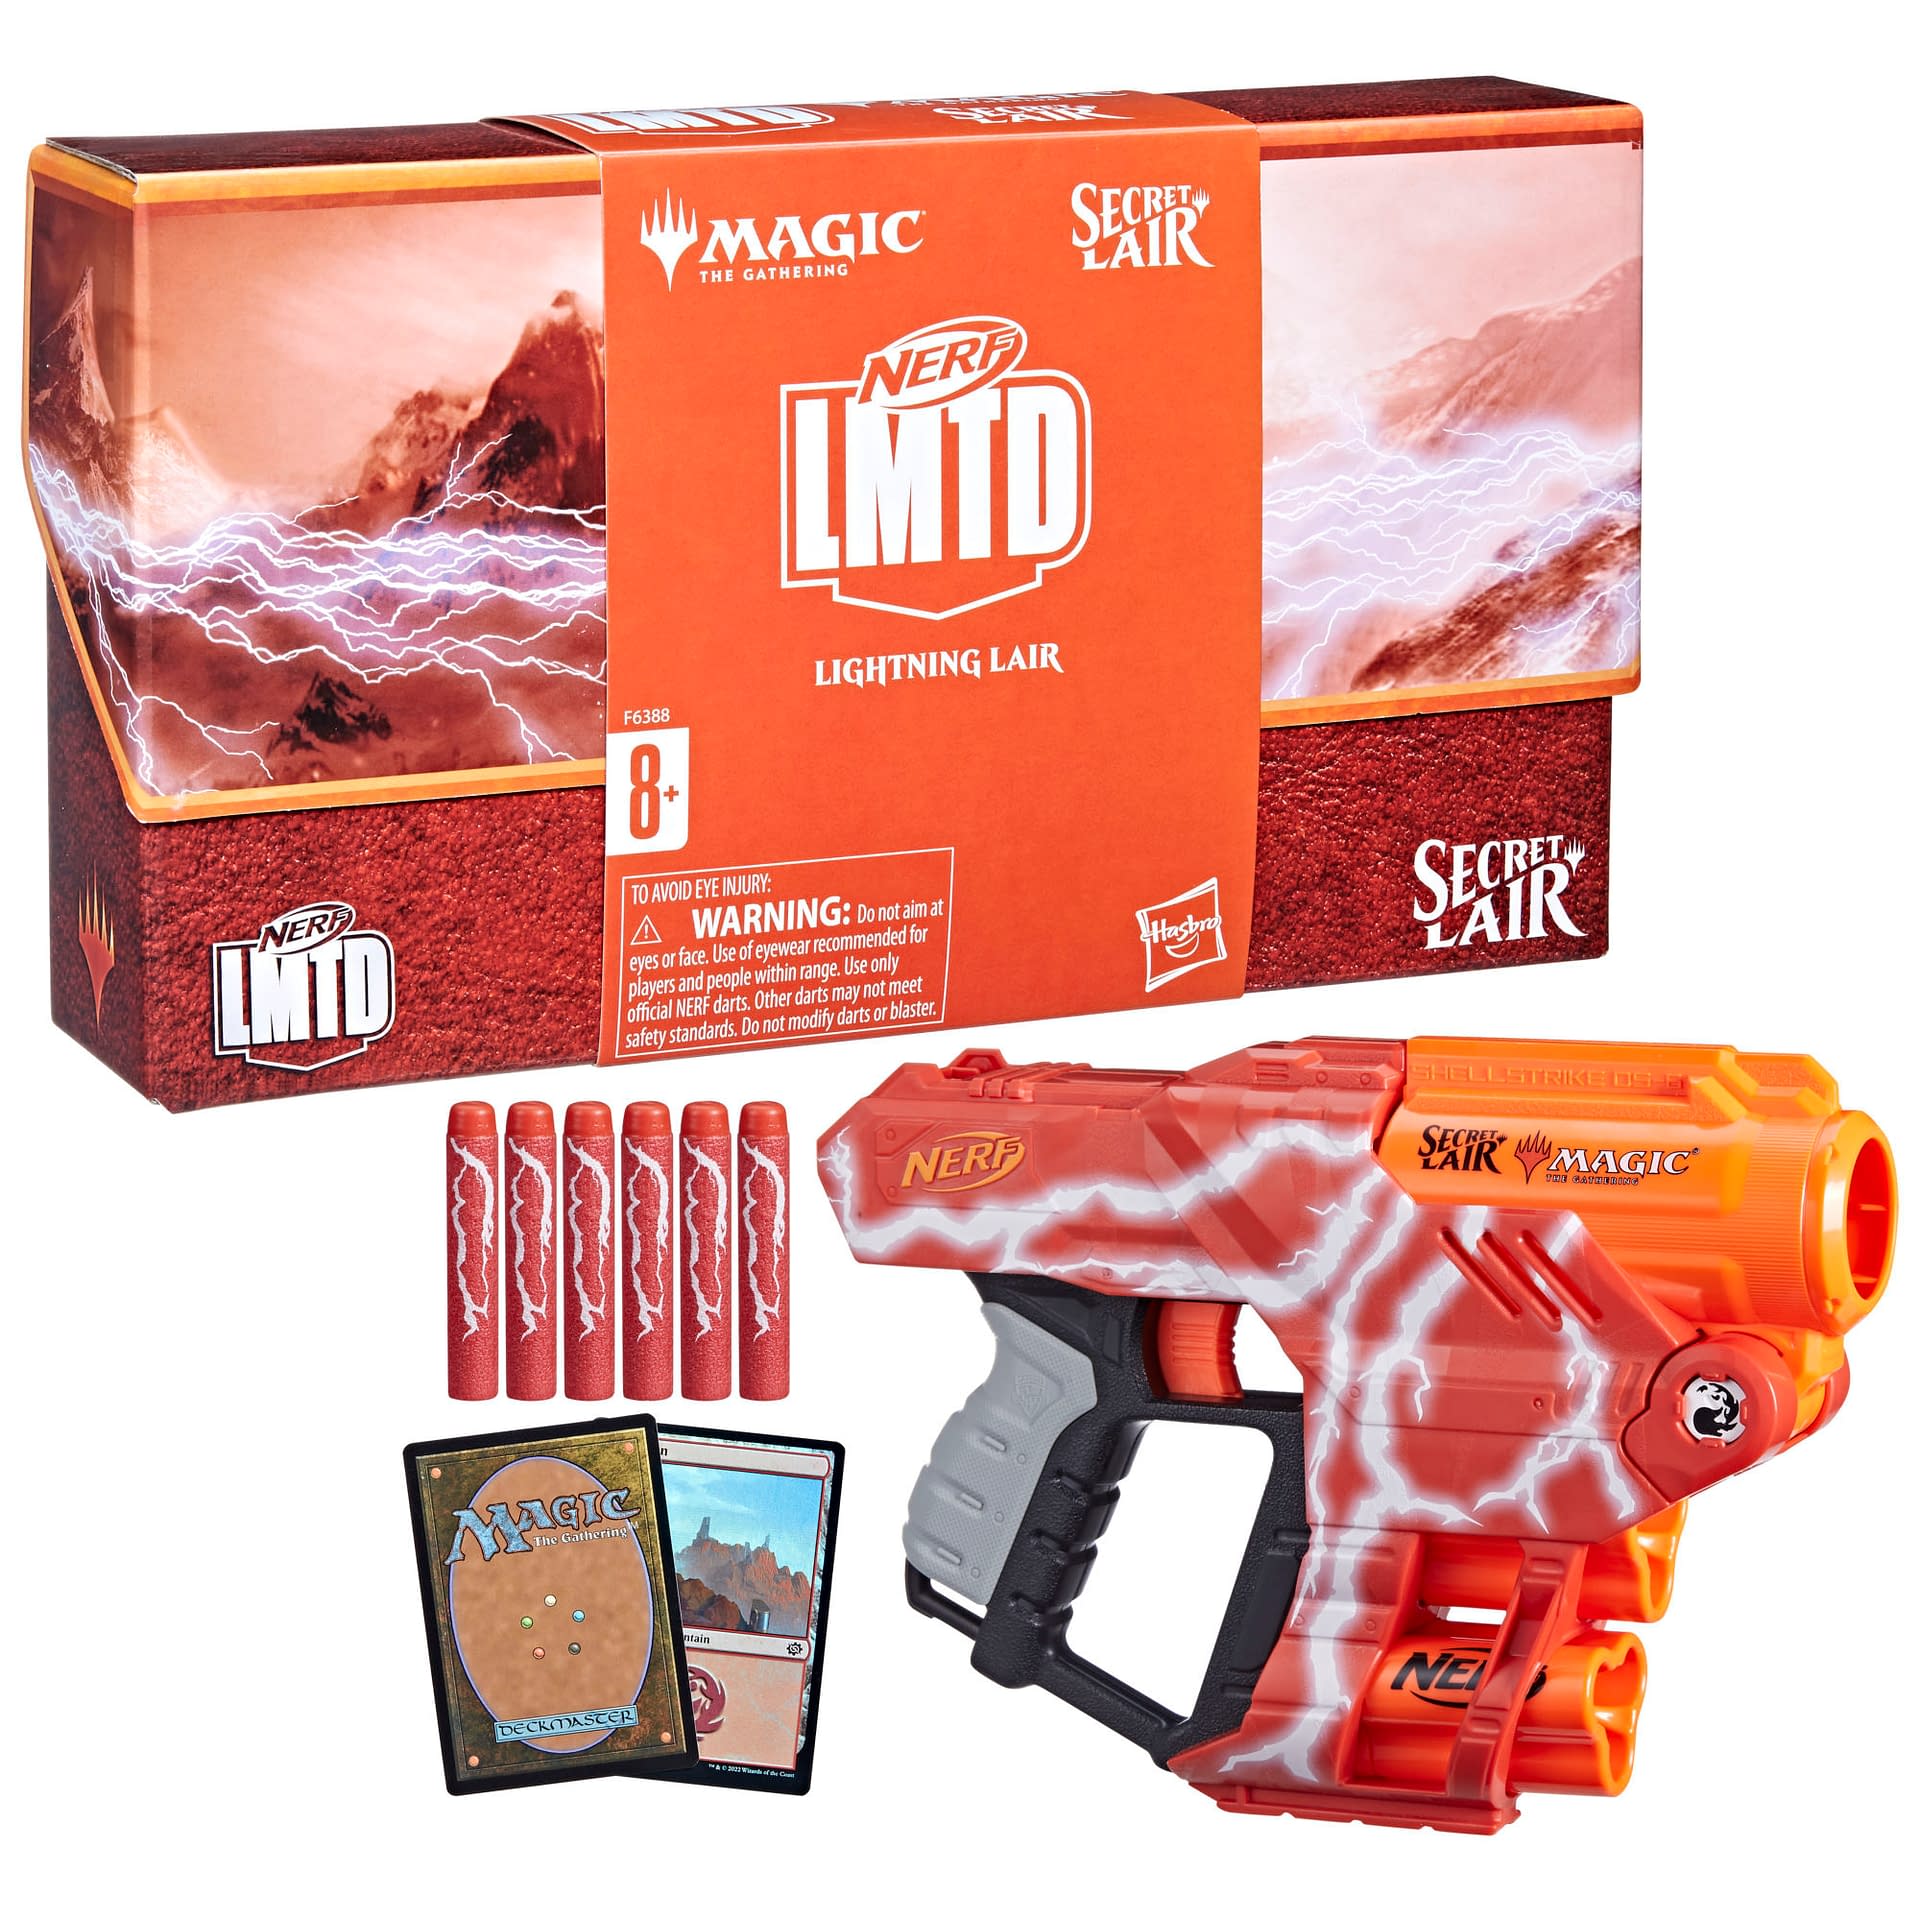 Cast Lightning with the New NERF x Magic: The Gathering Blaster